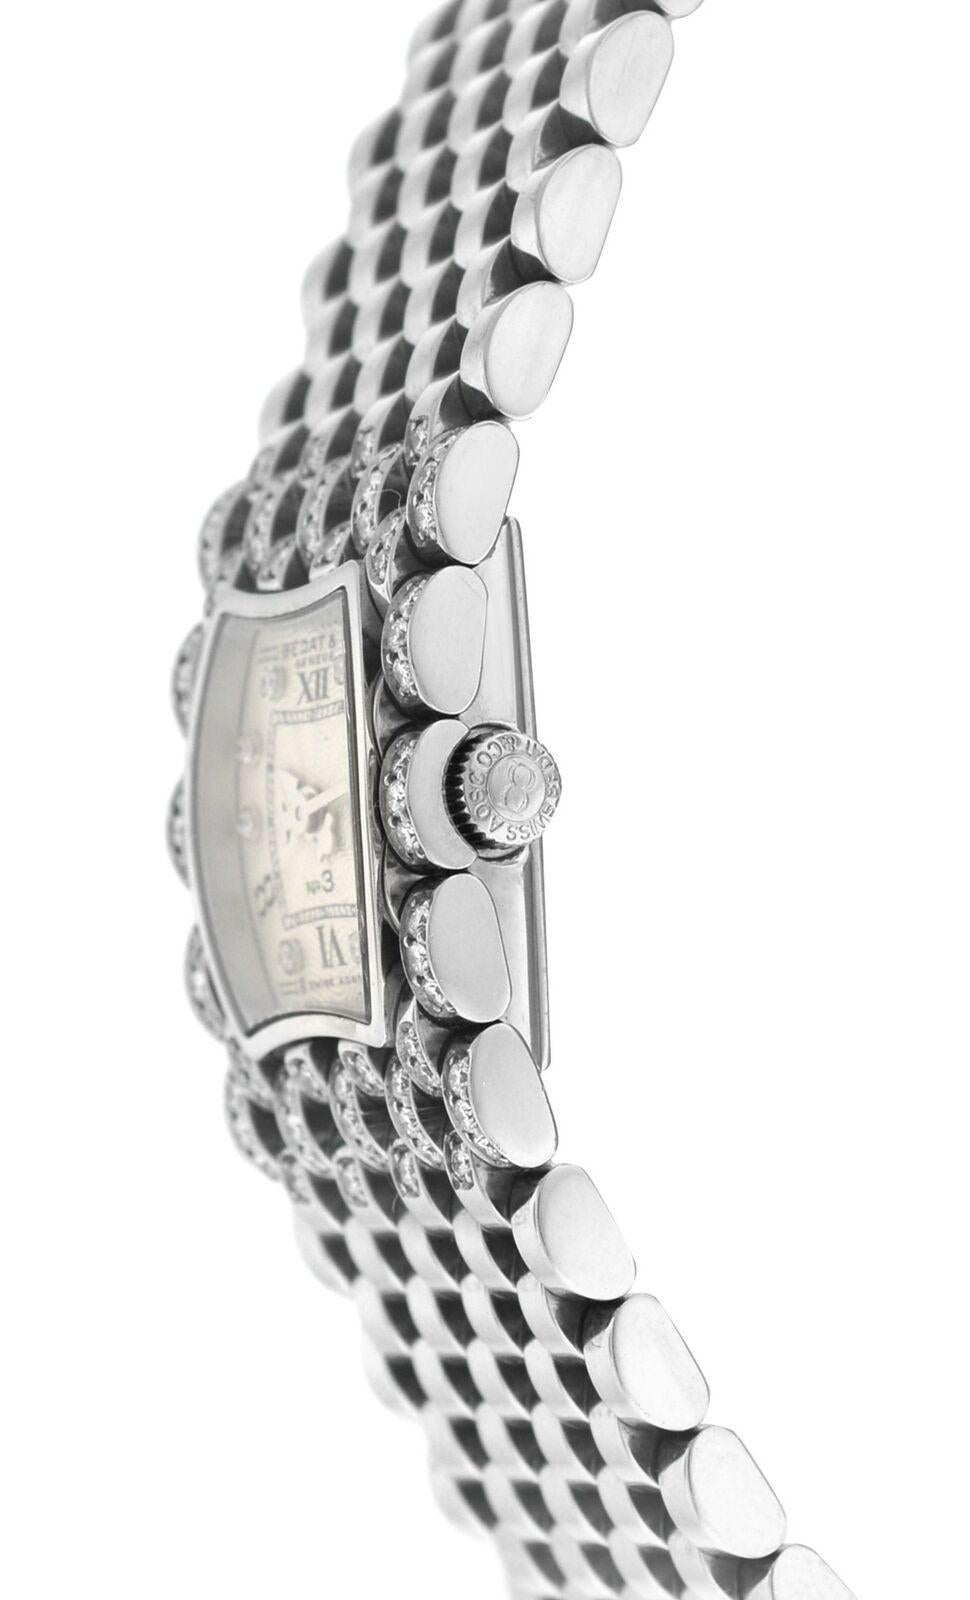 Brand	Bedat & Co.
Model	No 3 Ref. 308
Gender	Ladies
Condition	Pre-owned
Movement	Quartz
Case Material	Stainless Steel
Bracelet / Strap Material	Stainless Steel
Clasp / Buckle Material	Stainless Steel
Clasp Type	Deployment
Bracelet / Strap width	18